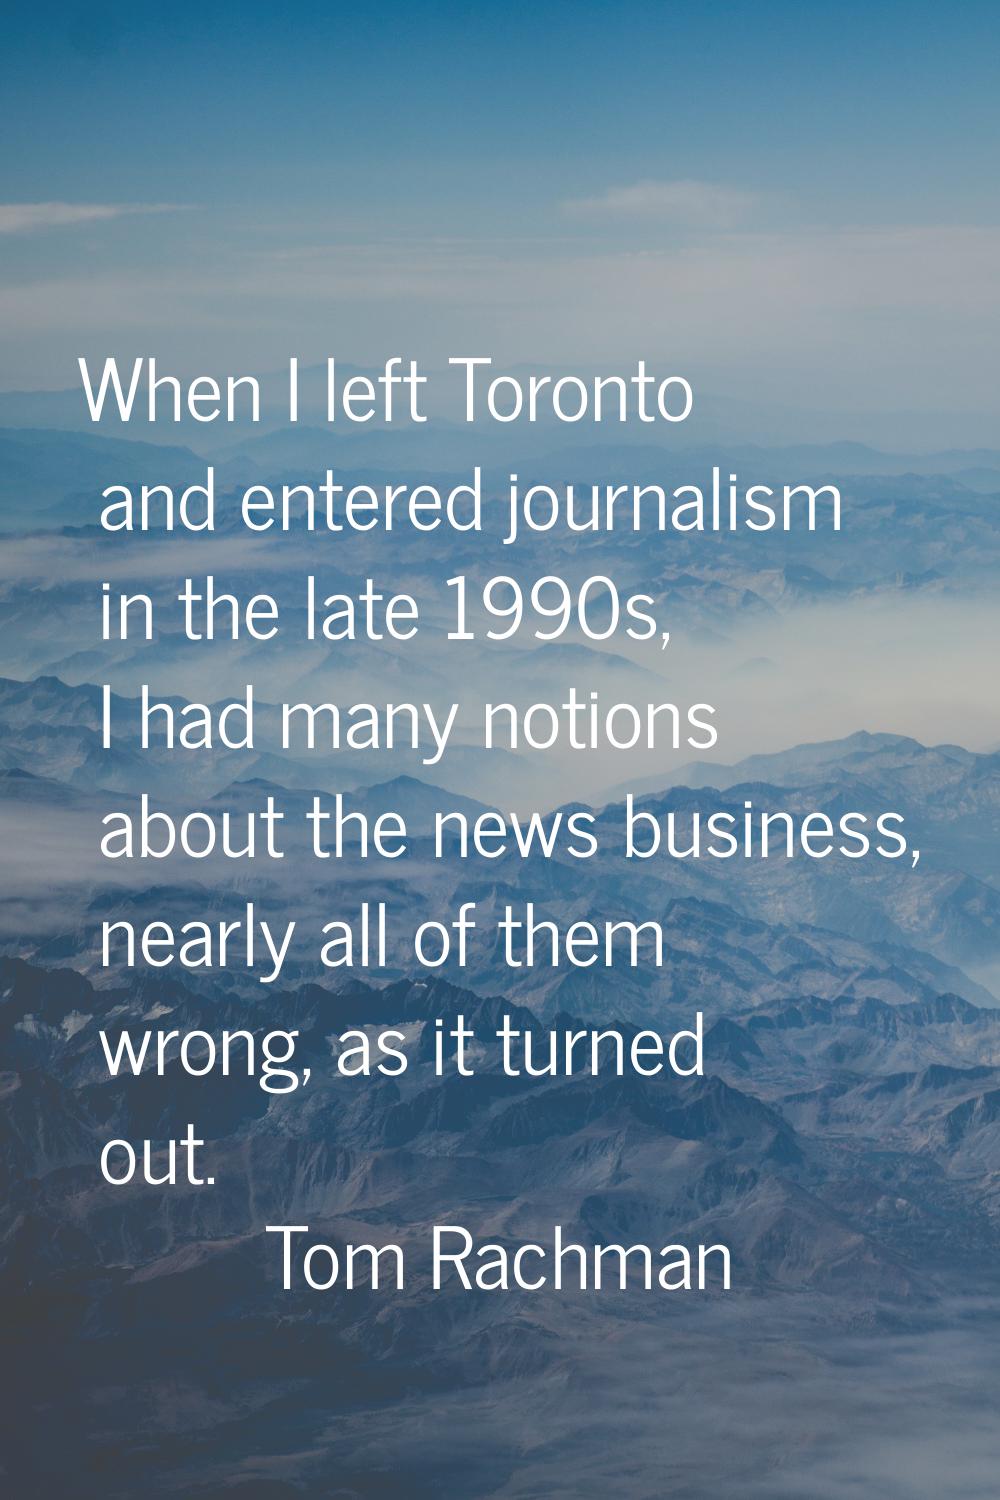 When I left Toronto and entered journalism in the late 1990s, I had many notions about the news bus